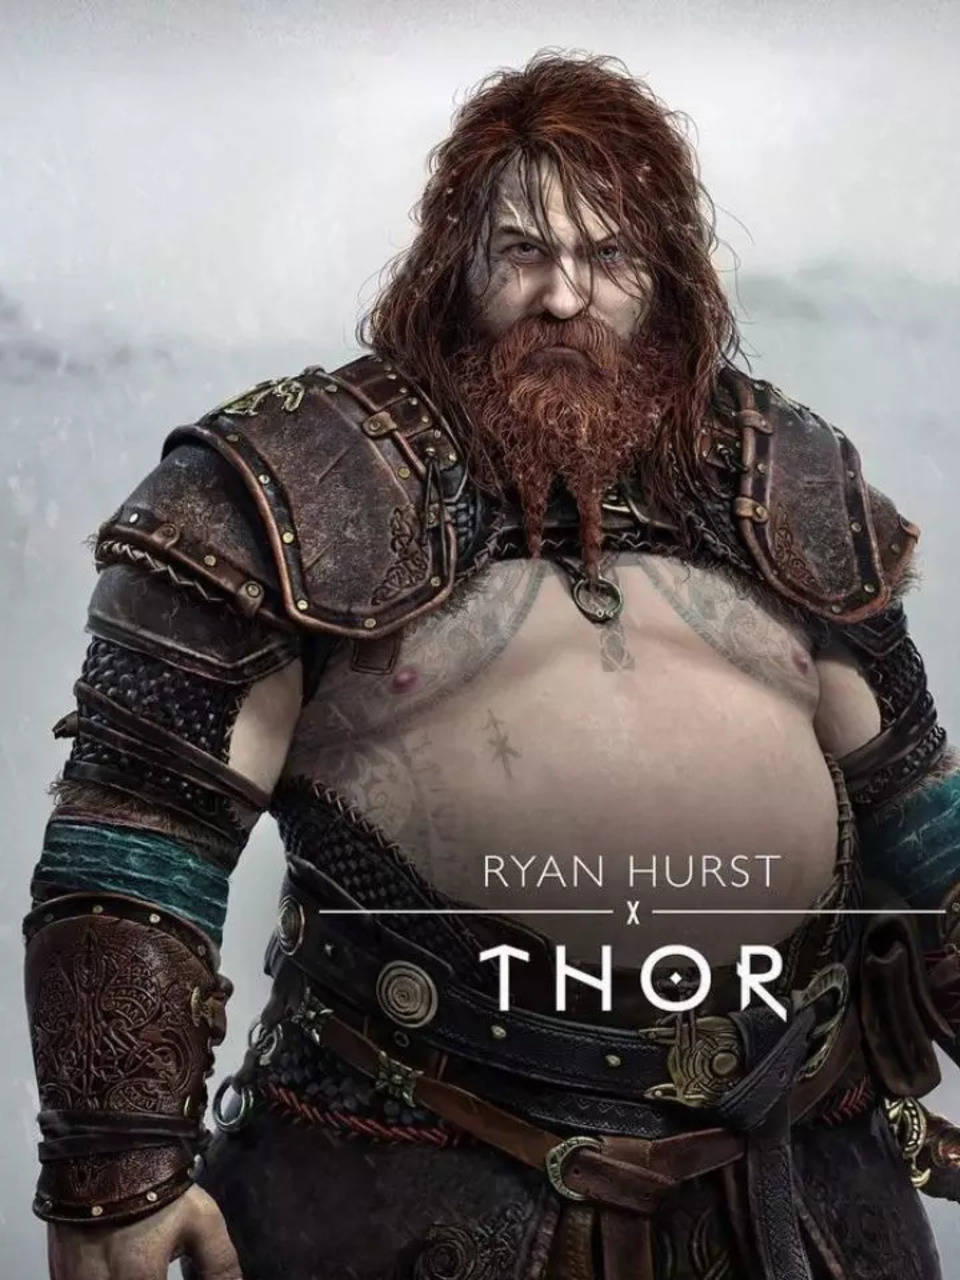 10 Ways God Of War's Thor Is A Great Take On The Norse God